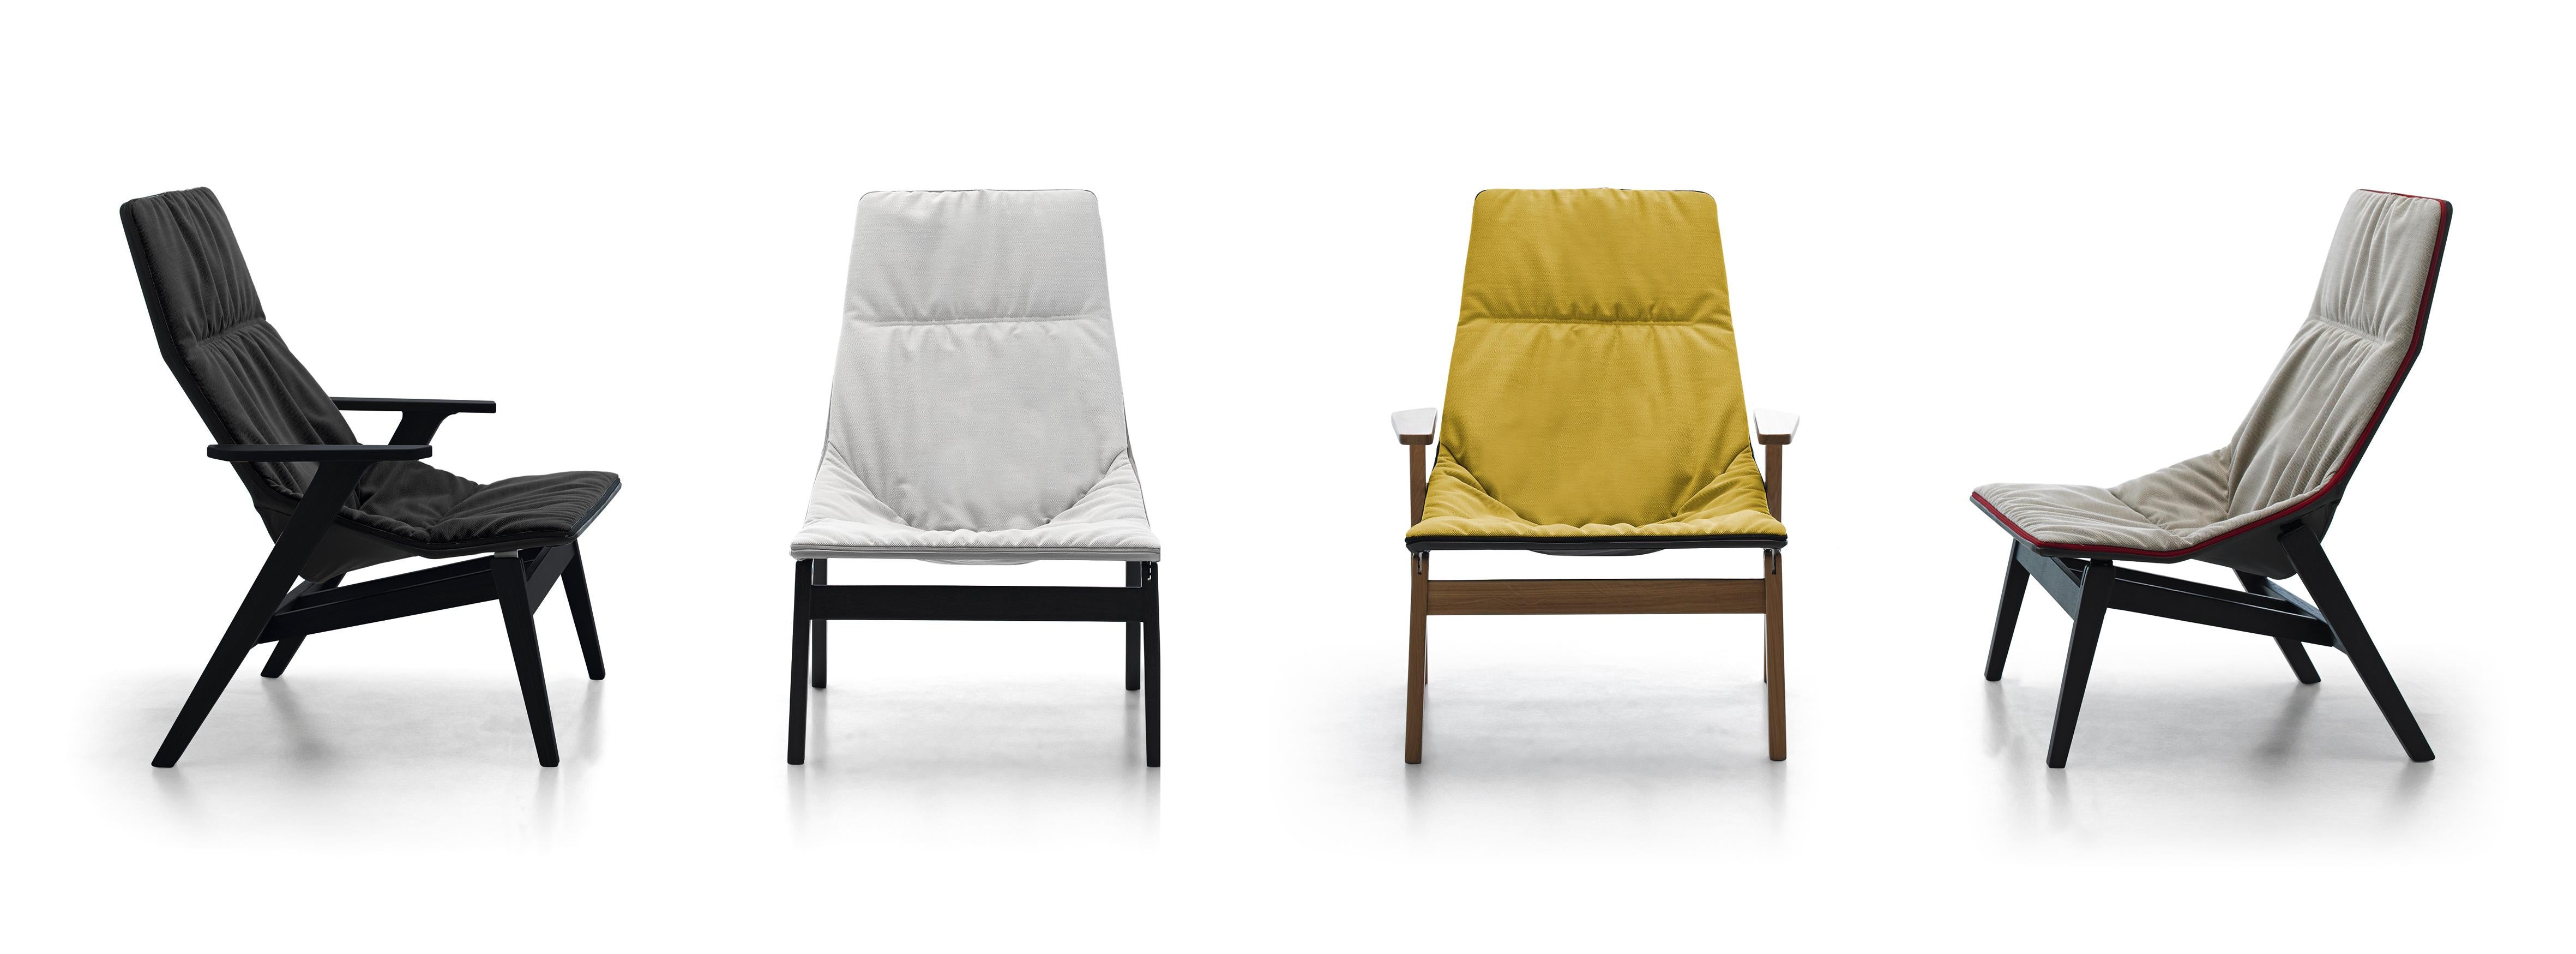 Jean-Marie Massaud, Ace Lounge Chair with Arms, Viccarbe, 2009 For Sale 11